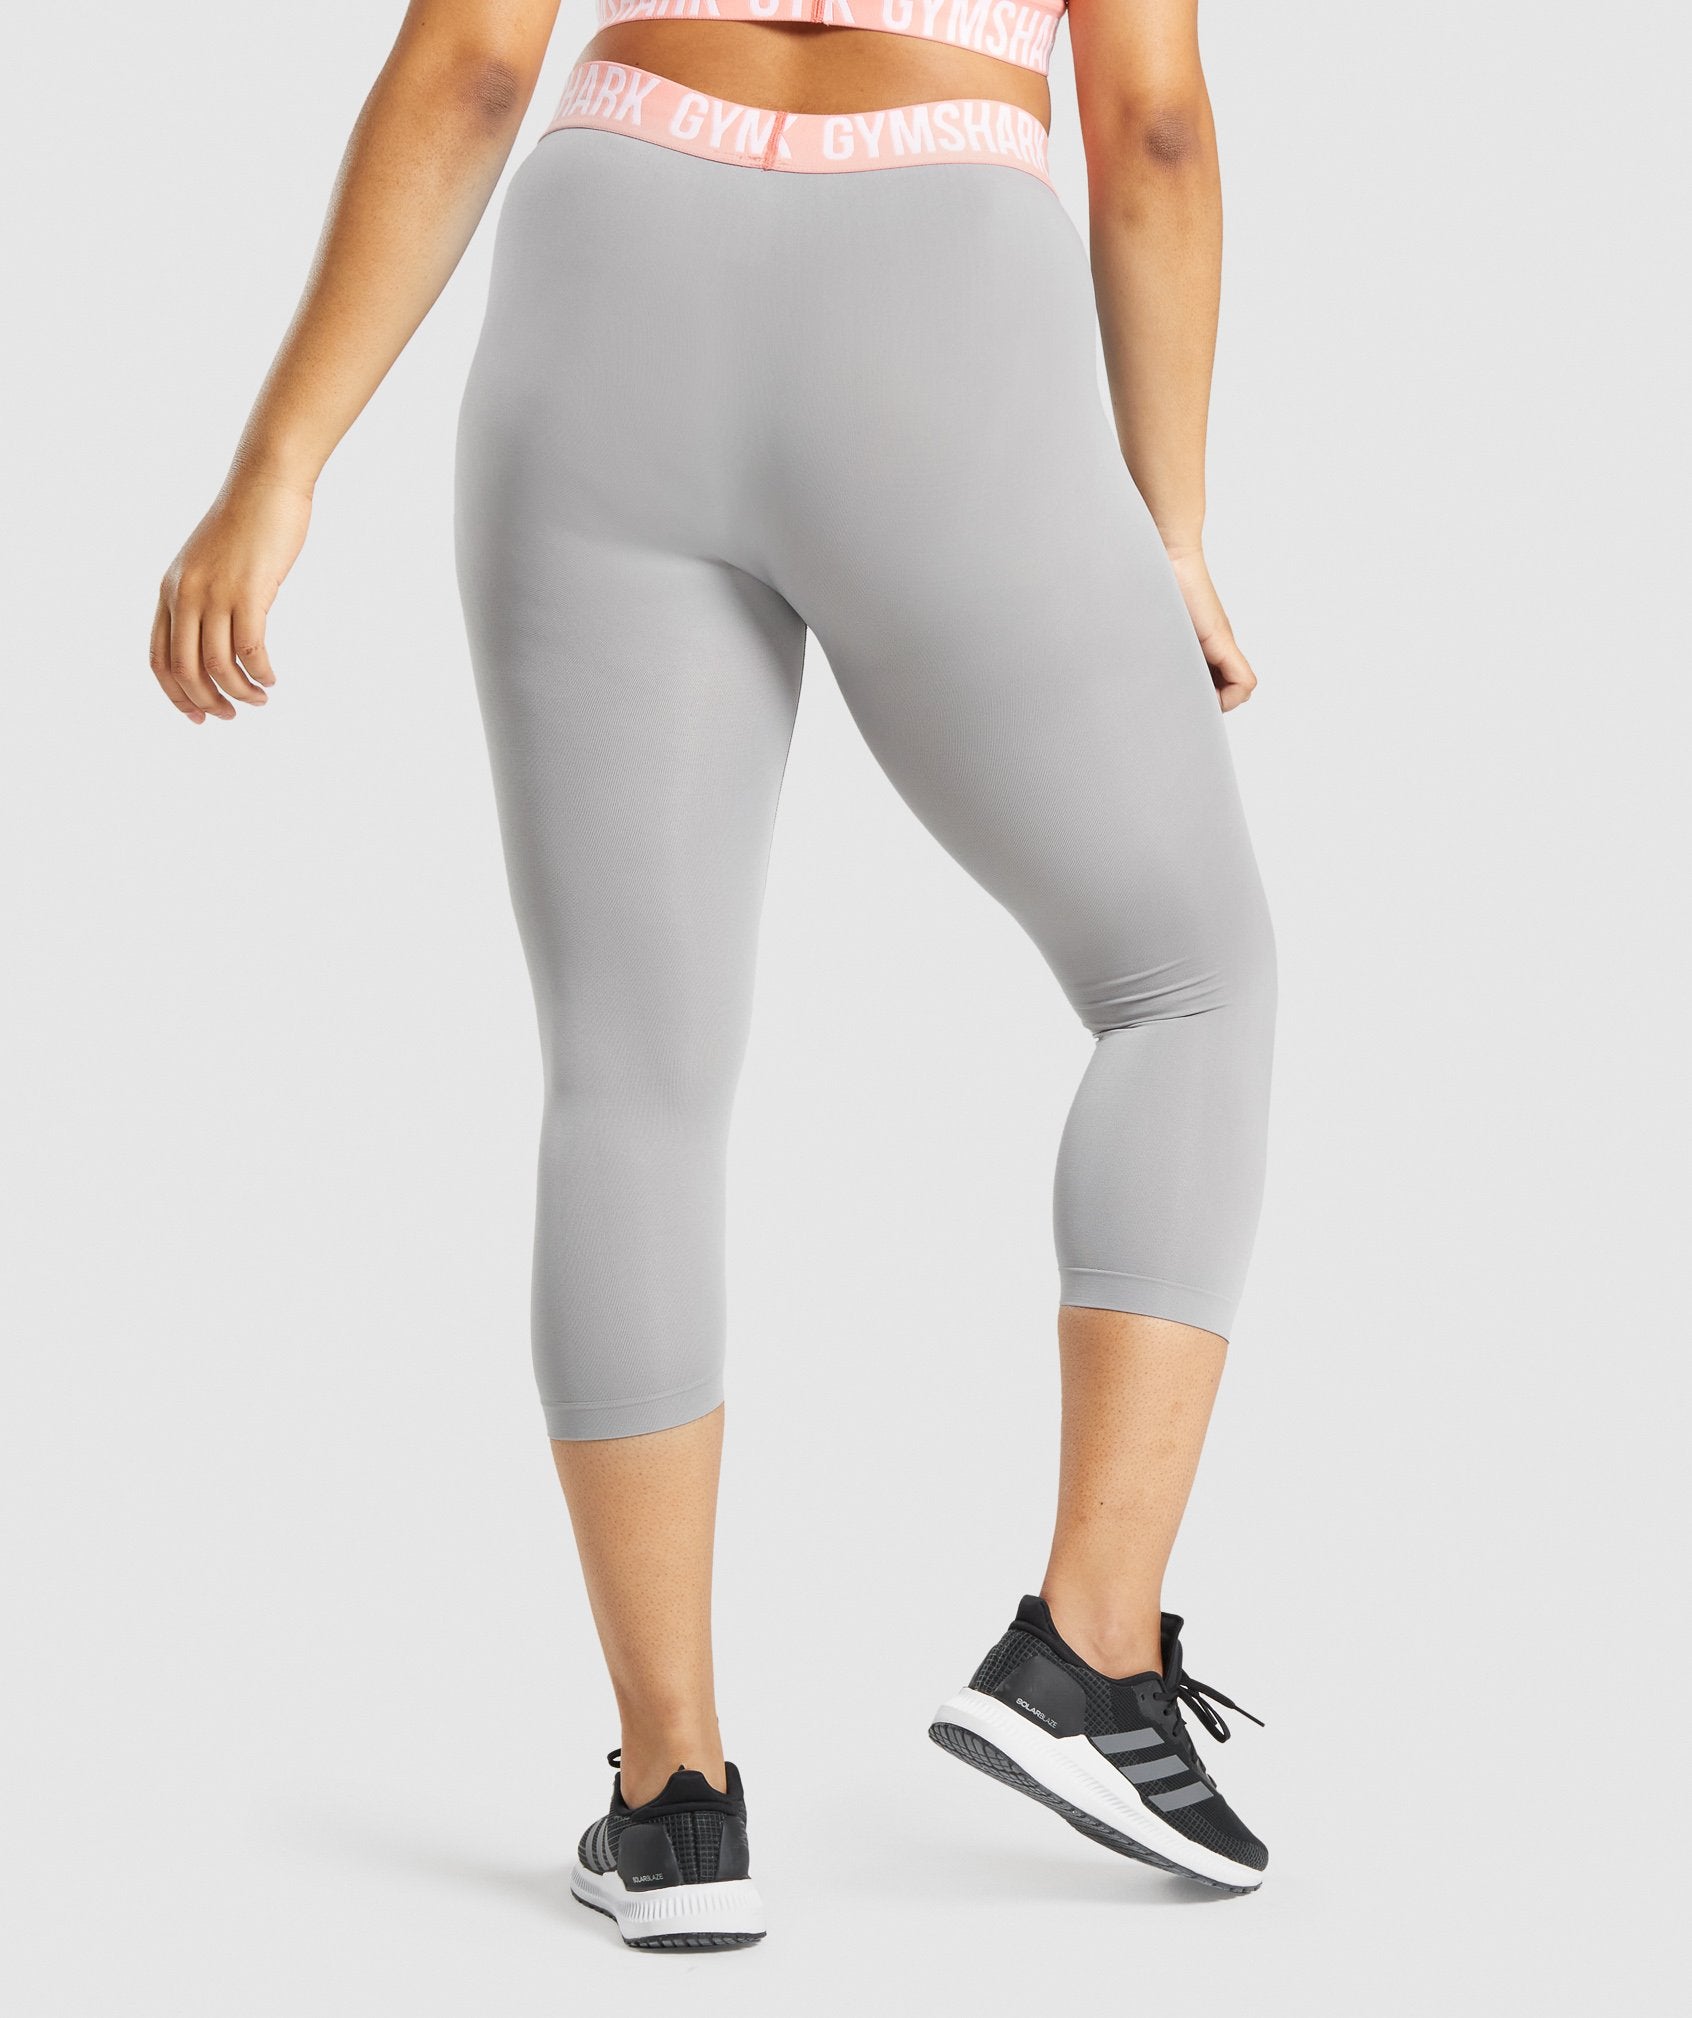 Gymshark Fit Seamless Leggings – Charcoal Low rise Fit, Seamless